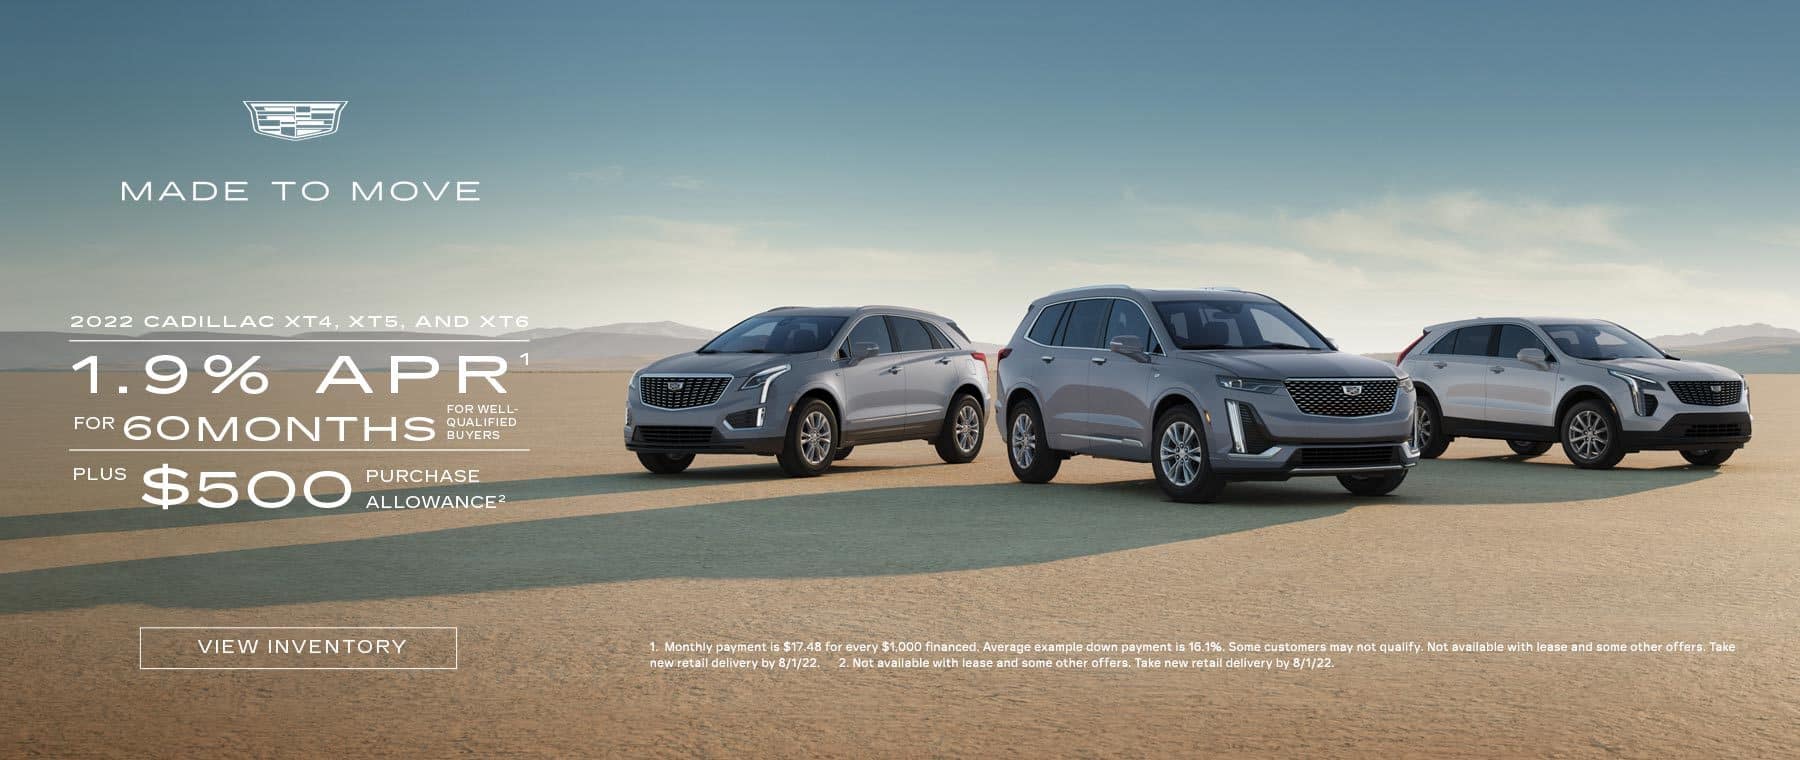 2022 Cadillac XT4, XT5, and XT6. 1.9% APR for 60 months for well-qualified buyers plus $500 purchase allowance.